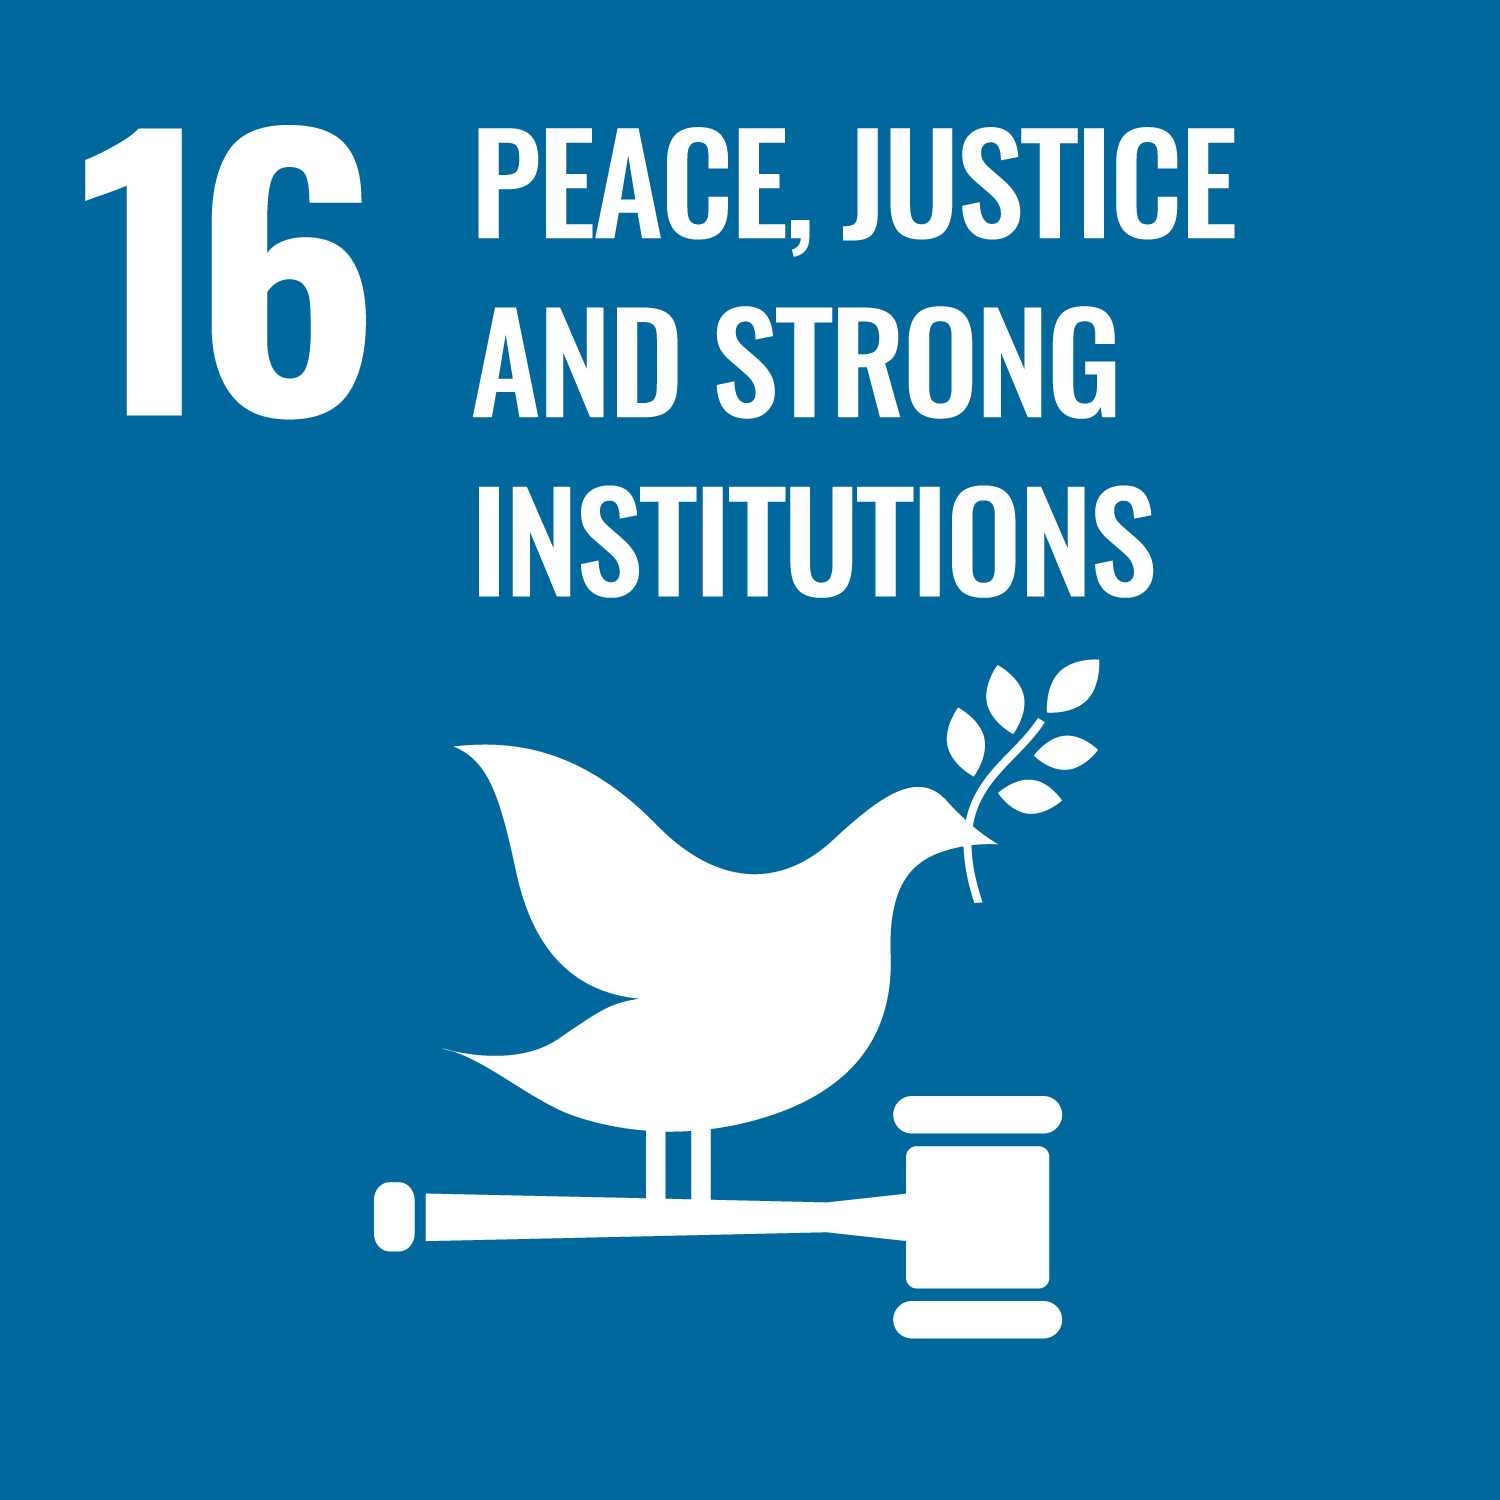 16: Peace, Justice and Strong Institutions